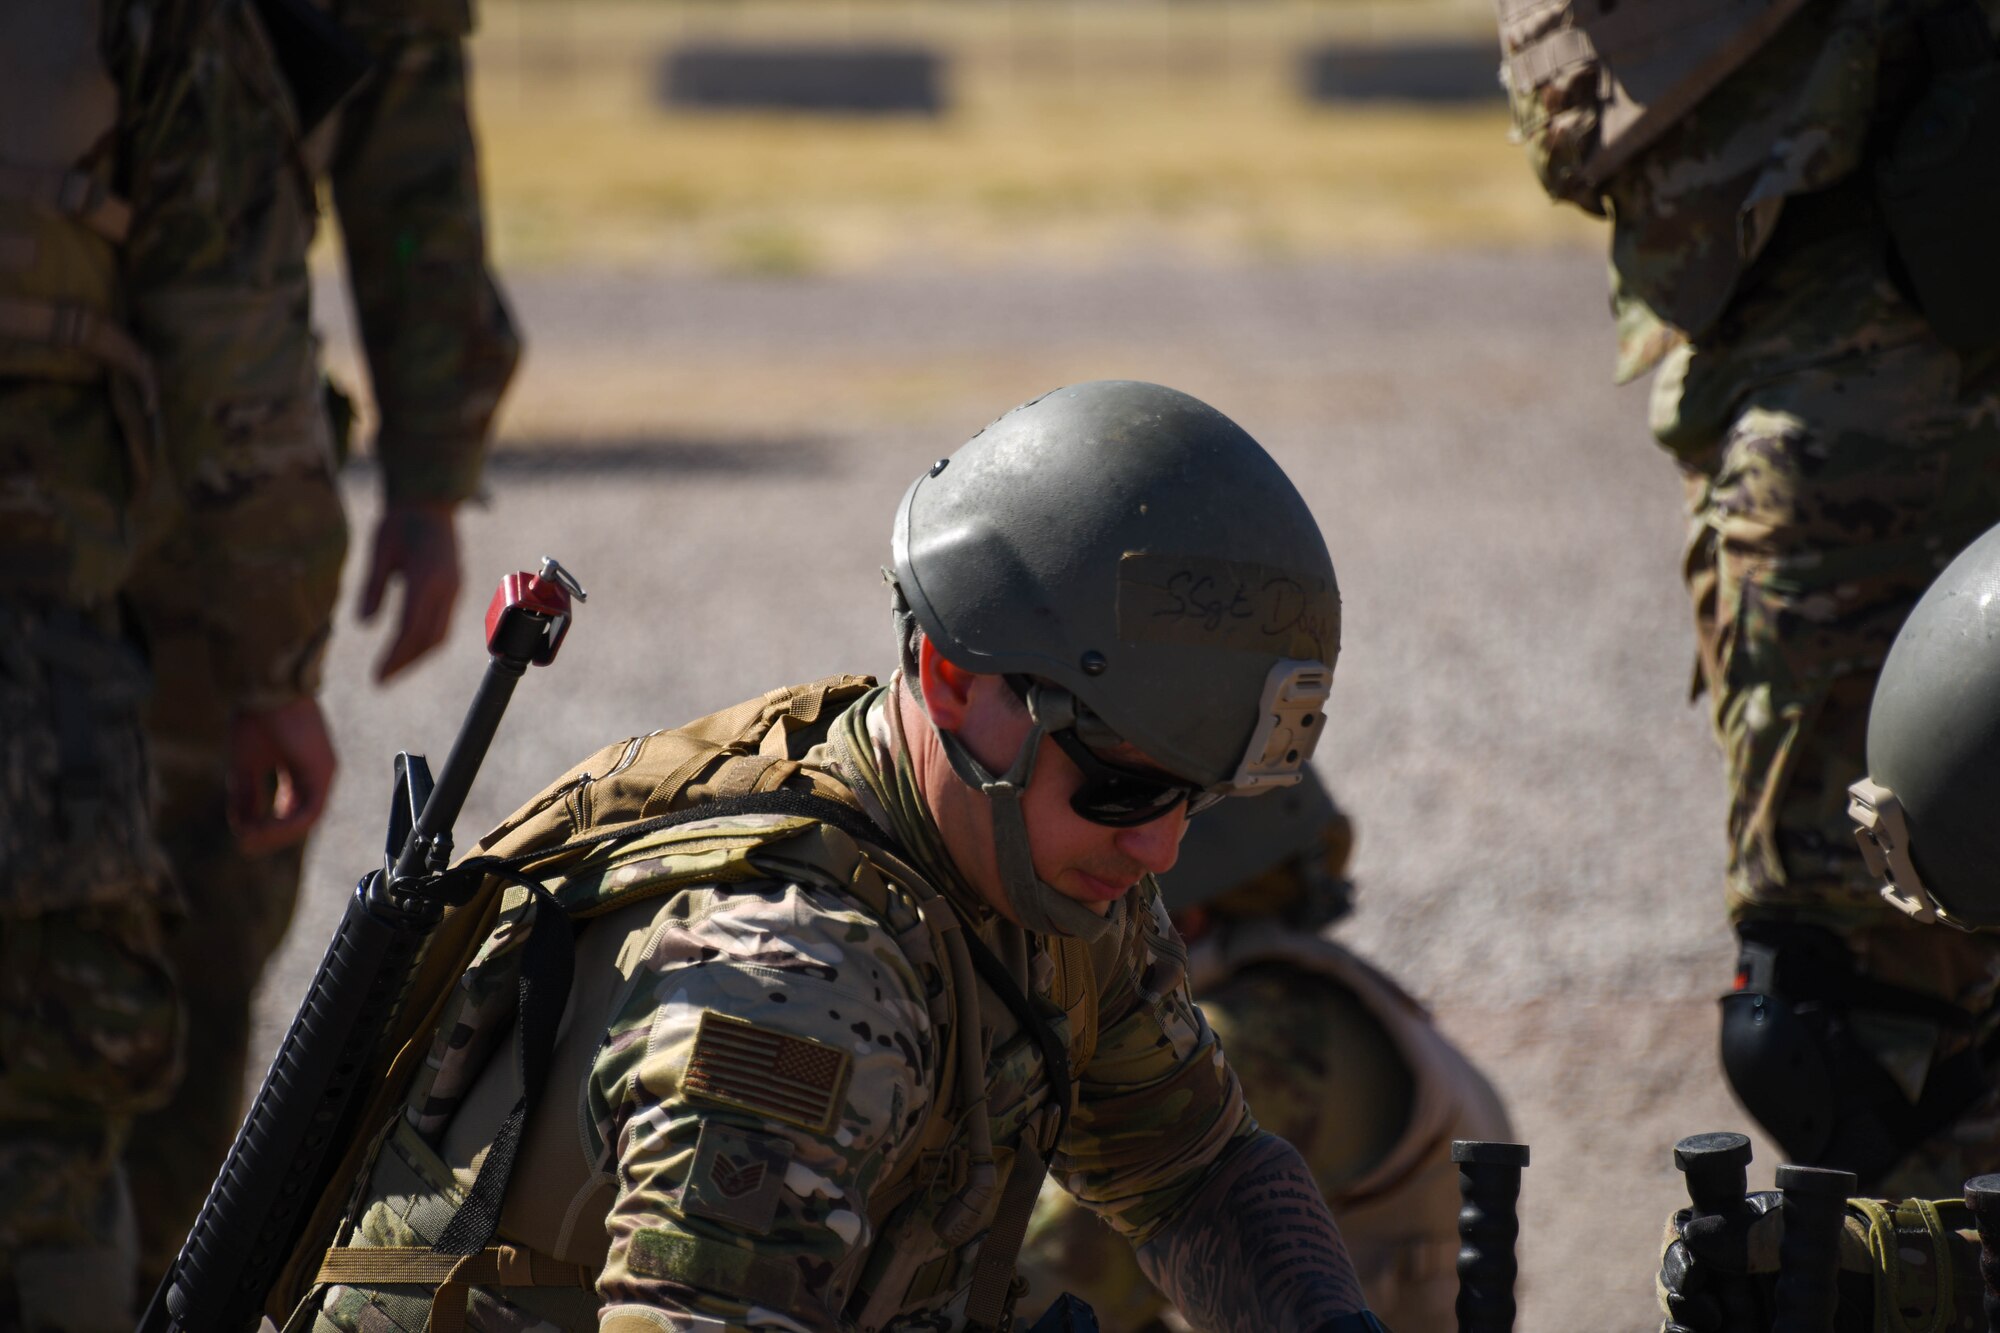 A photo of an Airman inspecting his gear while at an entry control point.